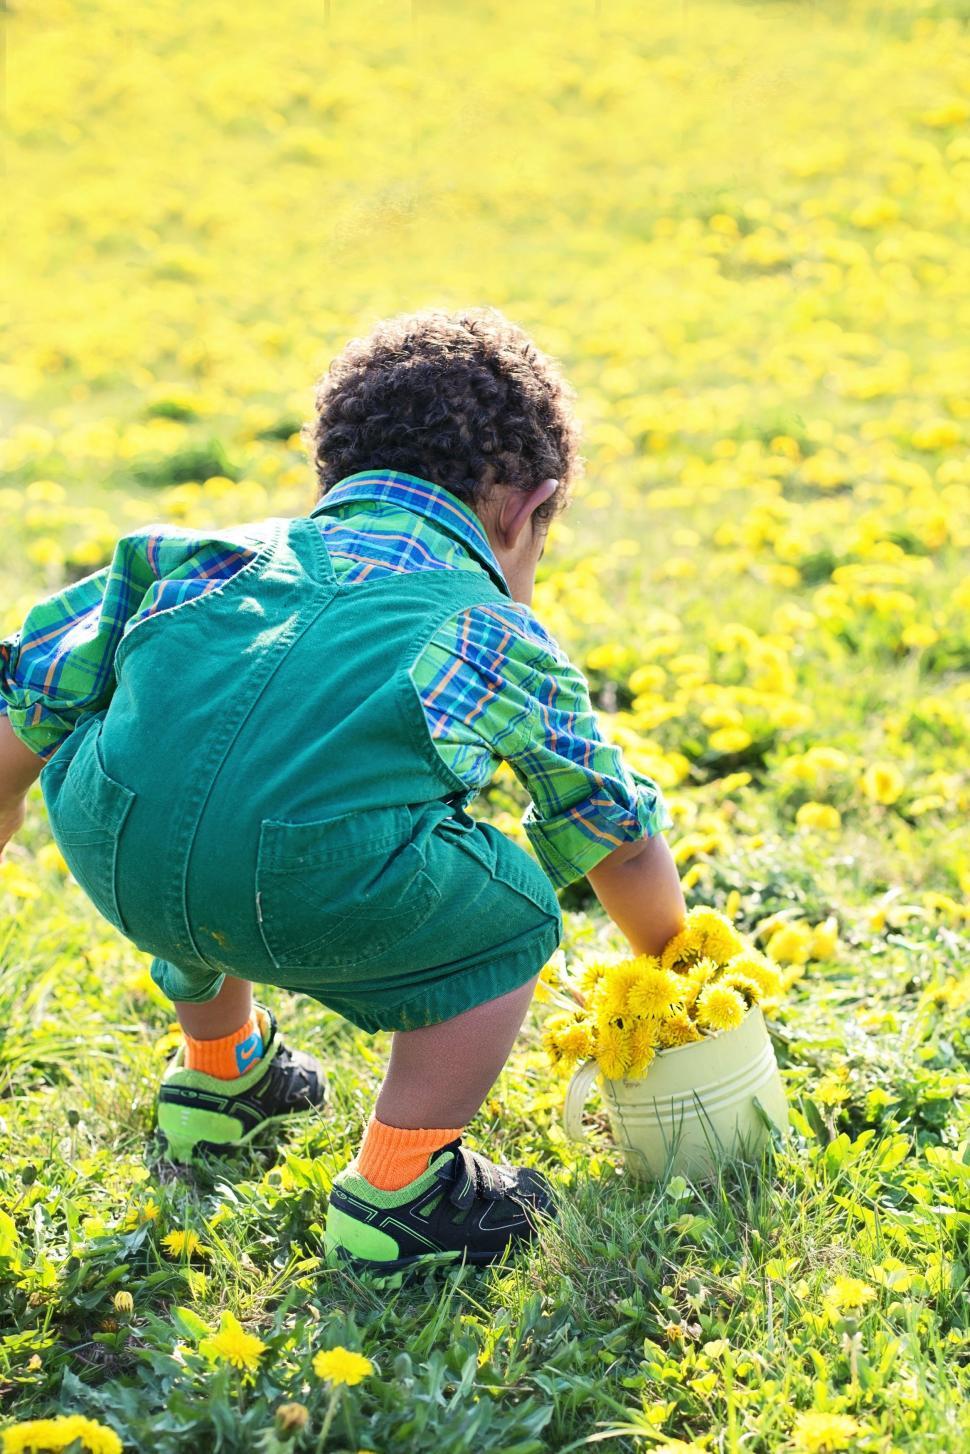 Free Image of Little Kid And Yellow Flowers  